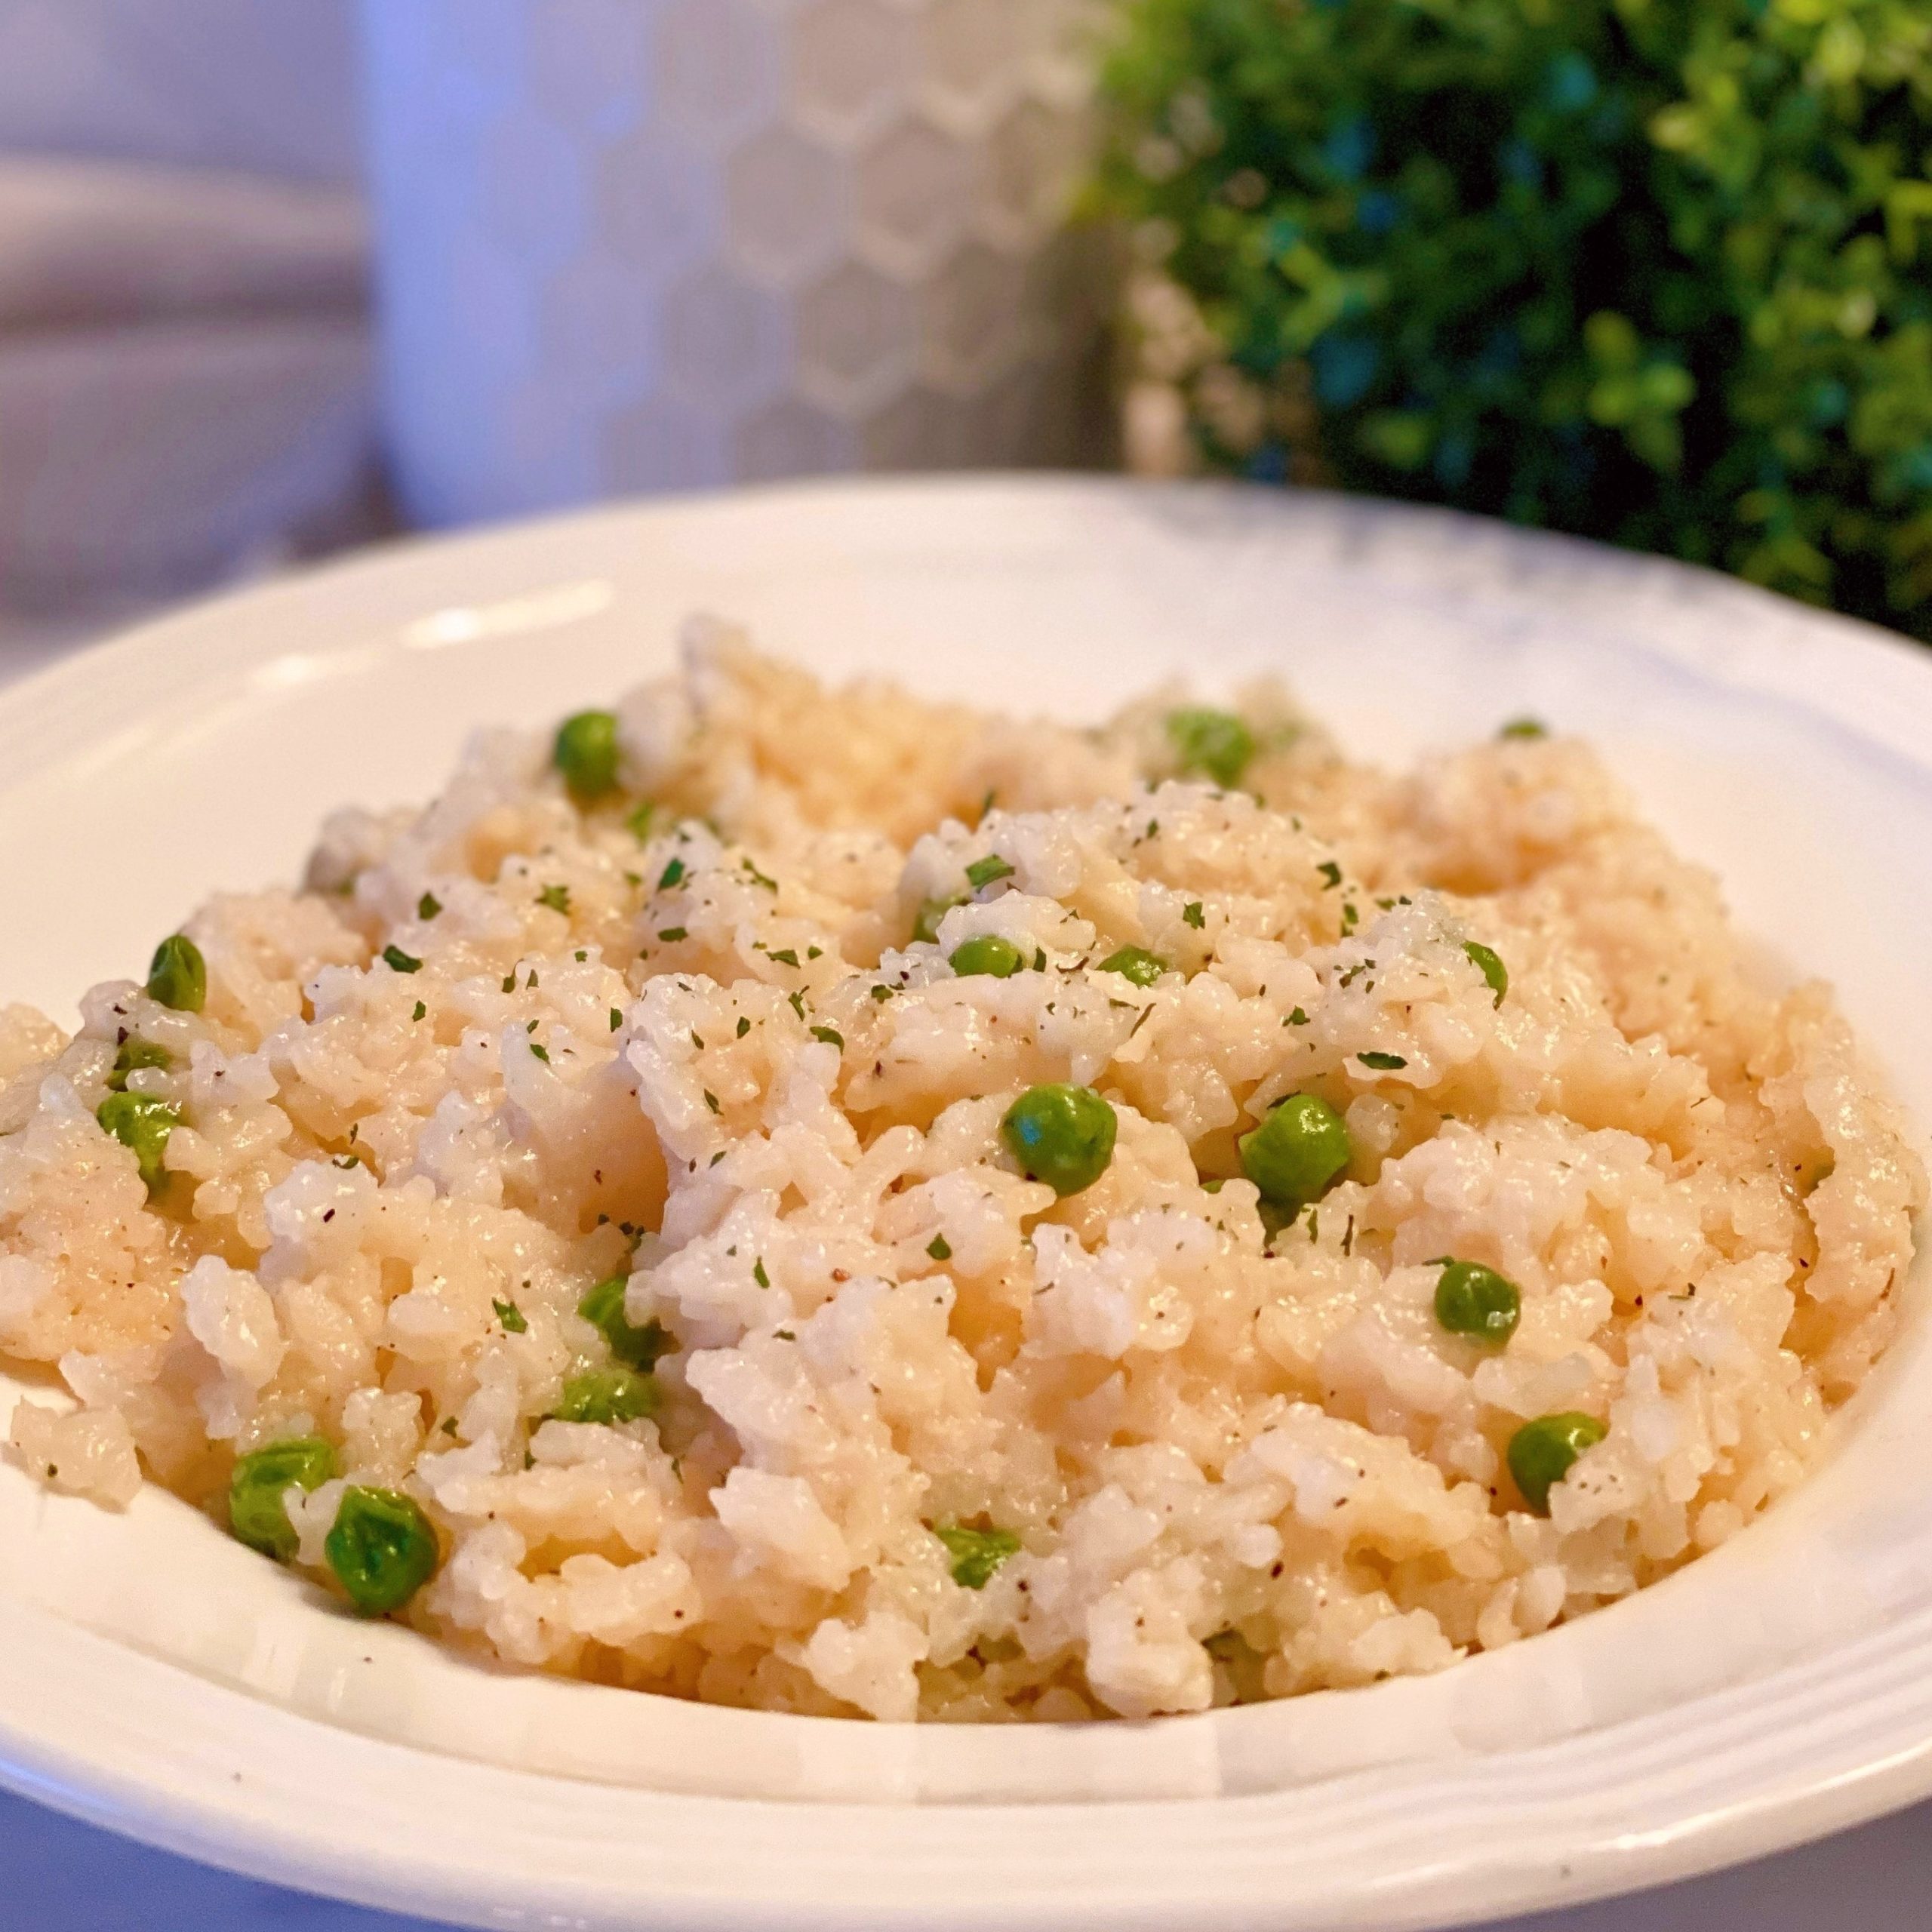 https://www.norinesnest.com/wp-content/uploads/2022/04/Risotto-2022-10-scaled.jpg